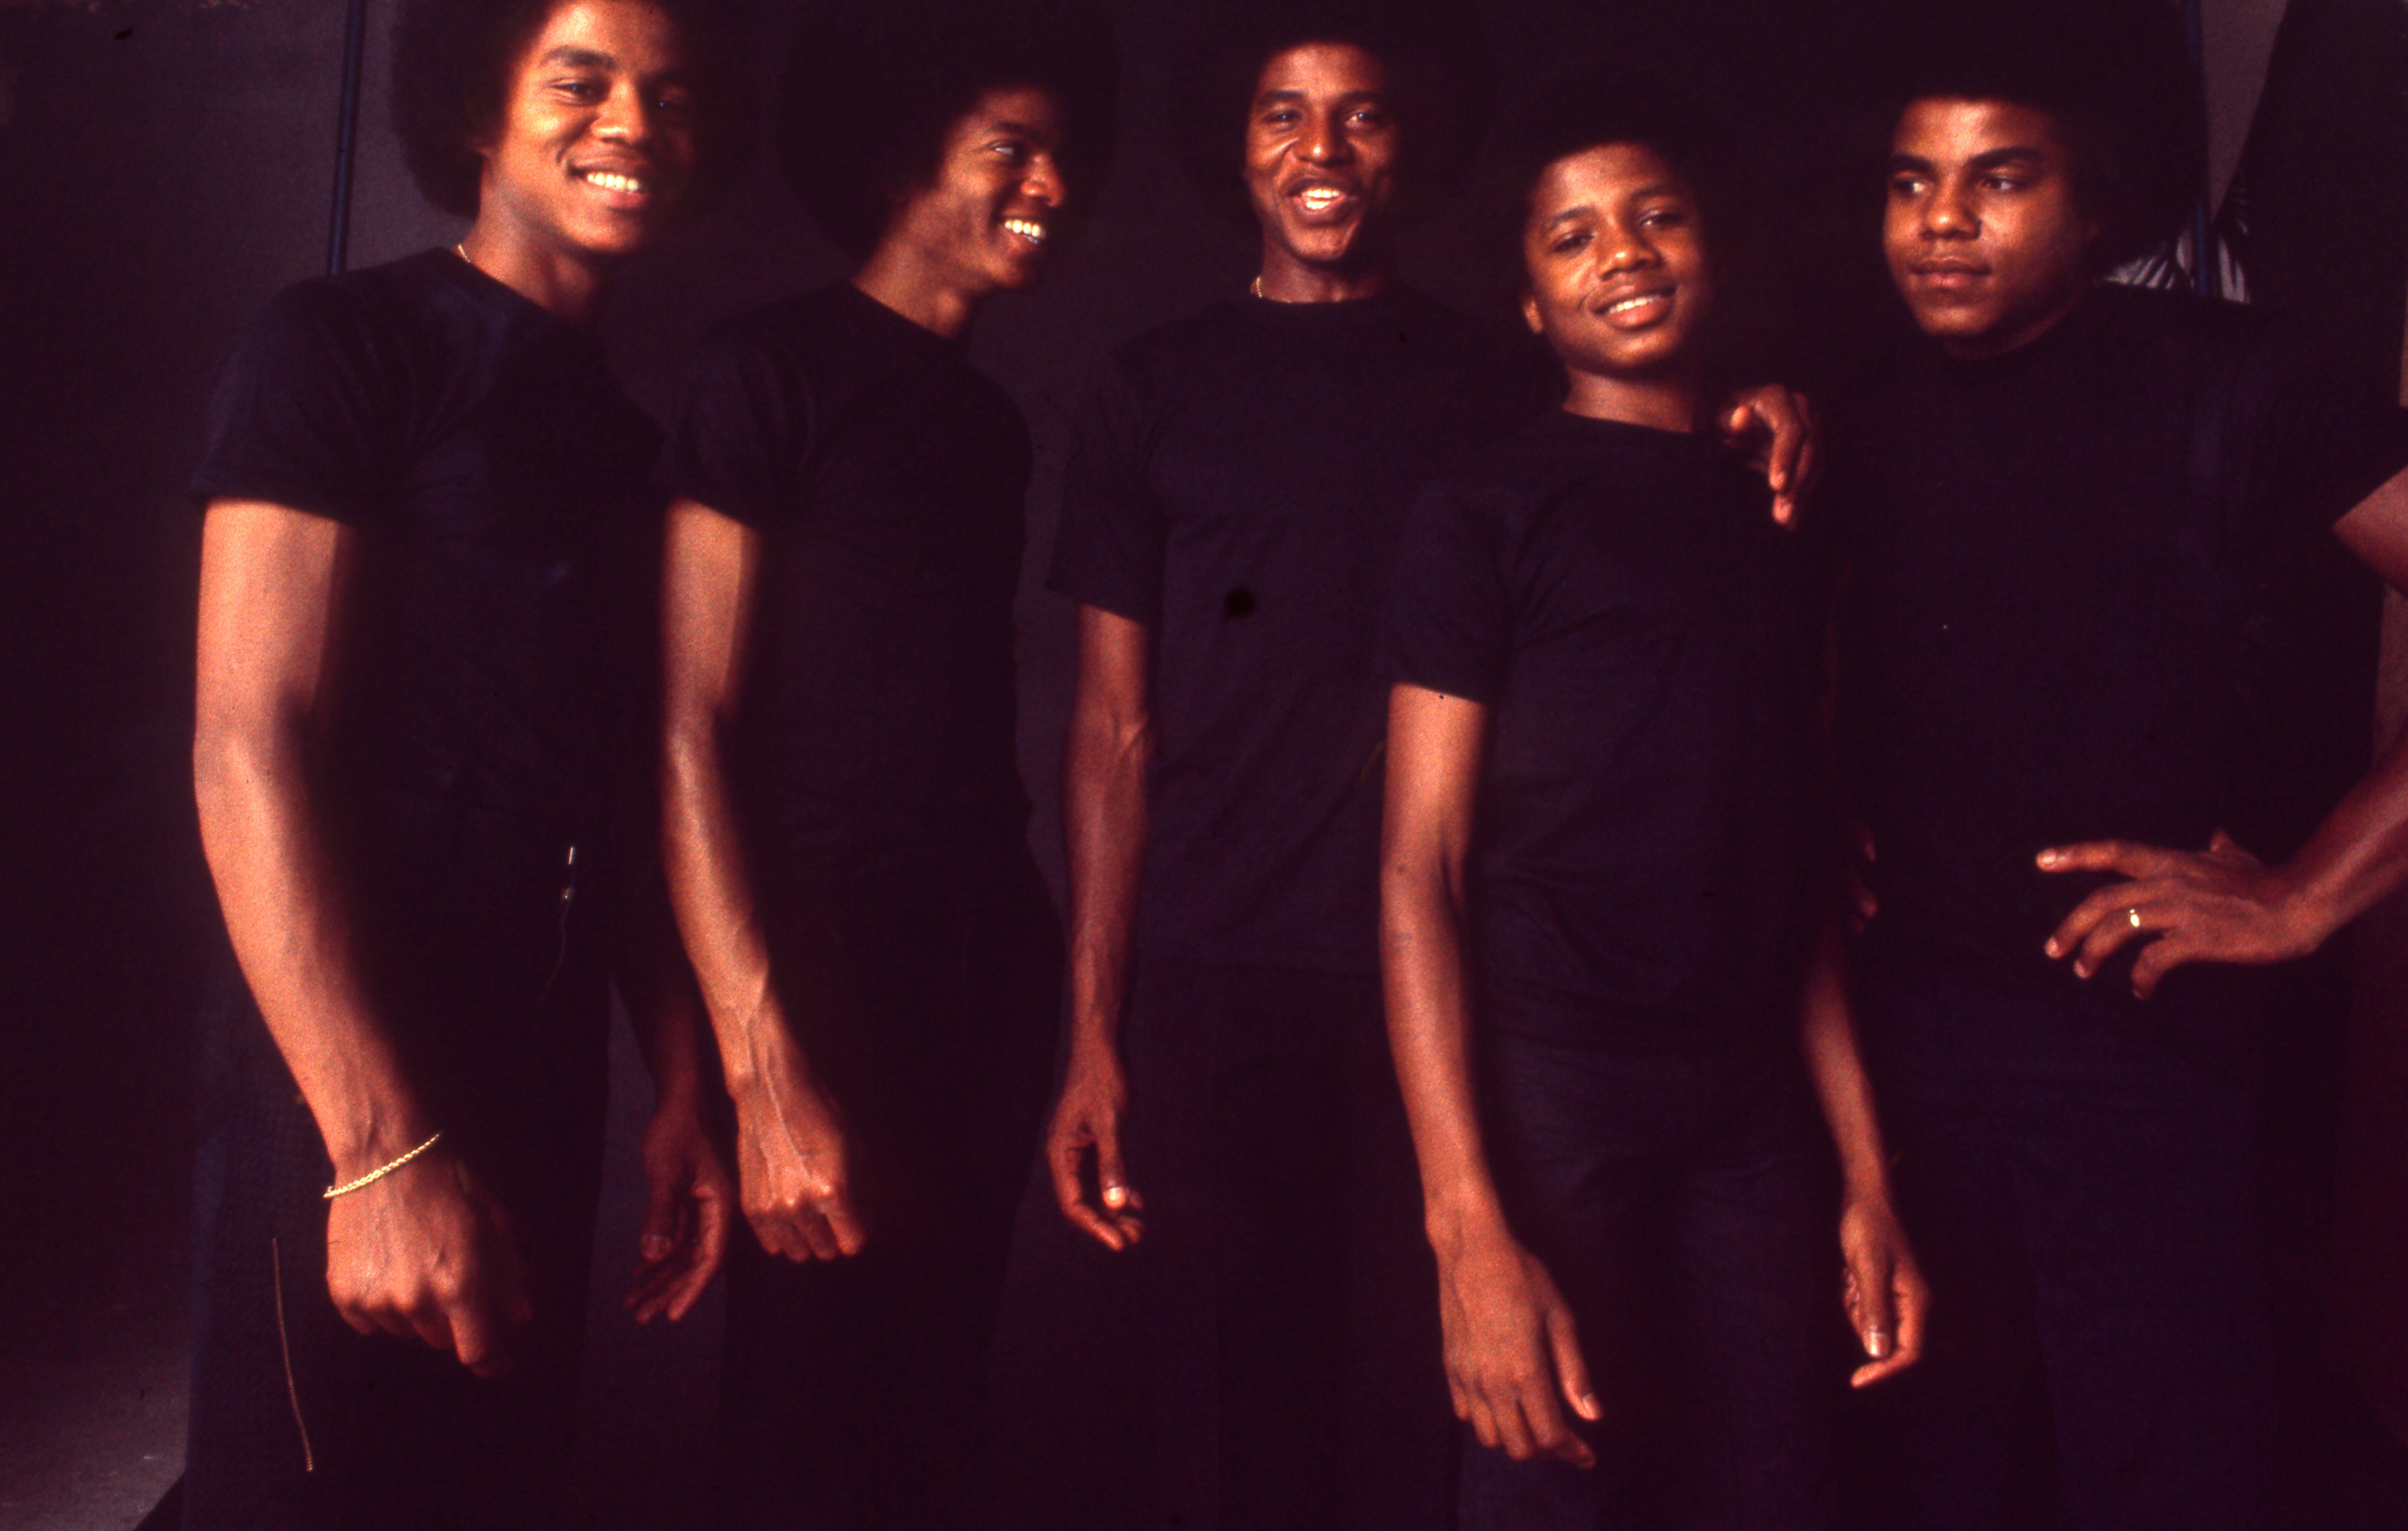 Michael Jackson and The Jackson 5 in an early PR photo circa 1975.